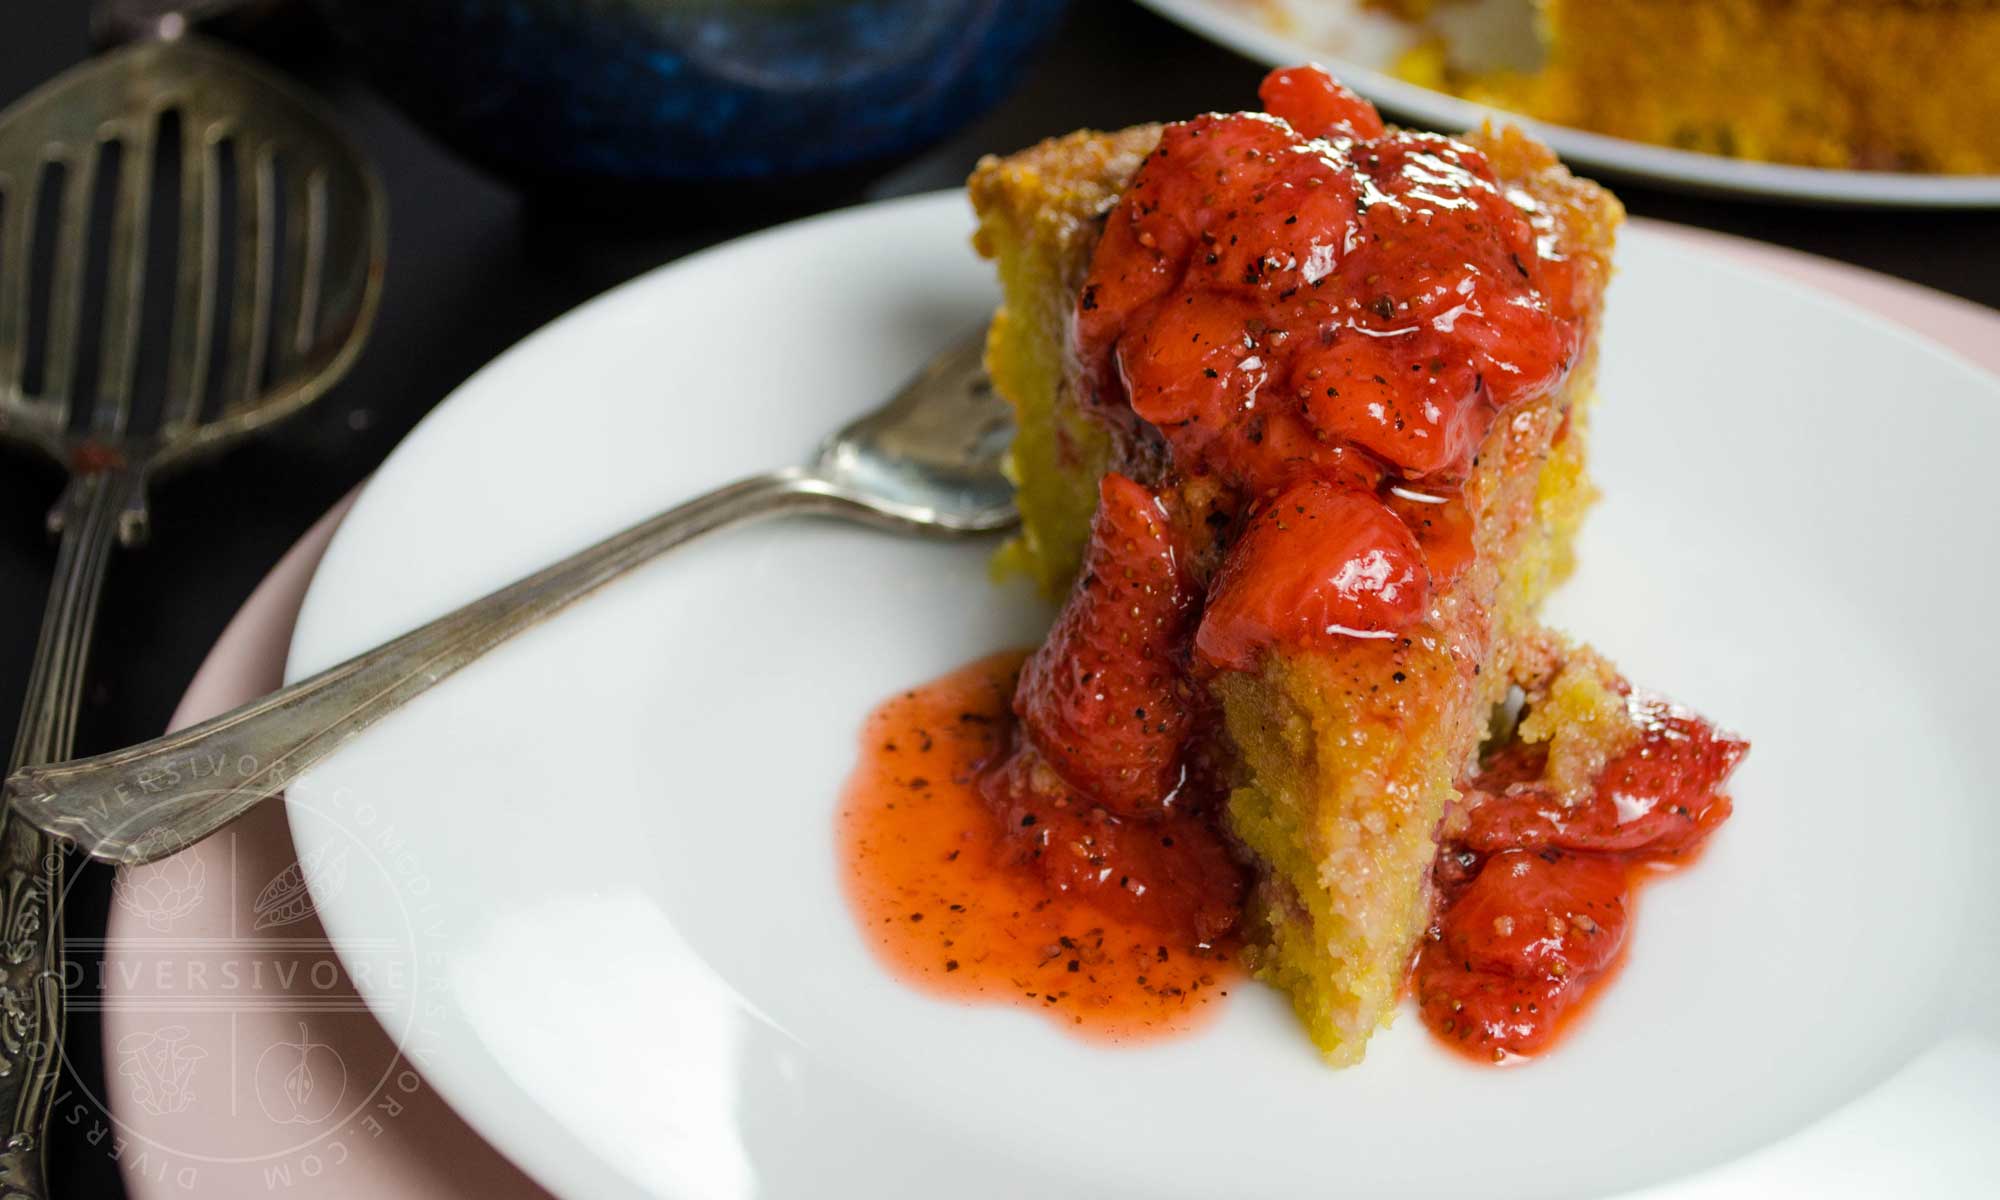 Strawberry polenta cake with strawberry and black pepper compote served on a white plate with a silver fork